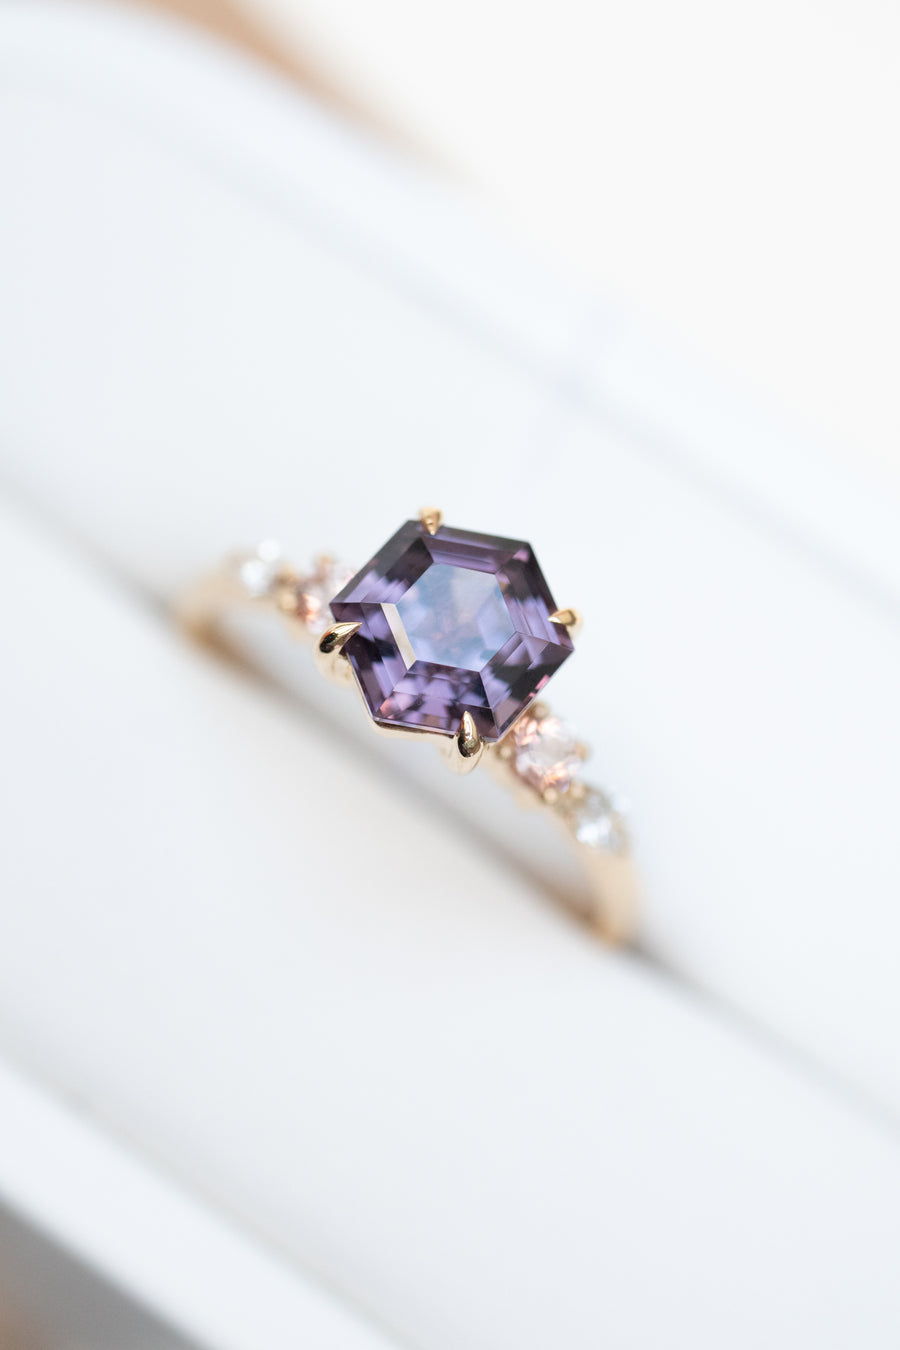 1.21carat Hexagon Purple Spinel with Small Pink Spinel & total 0.07carat Diamonds 18K Yellow Gold Ring